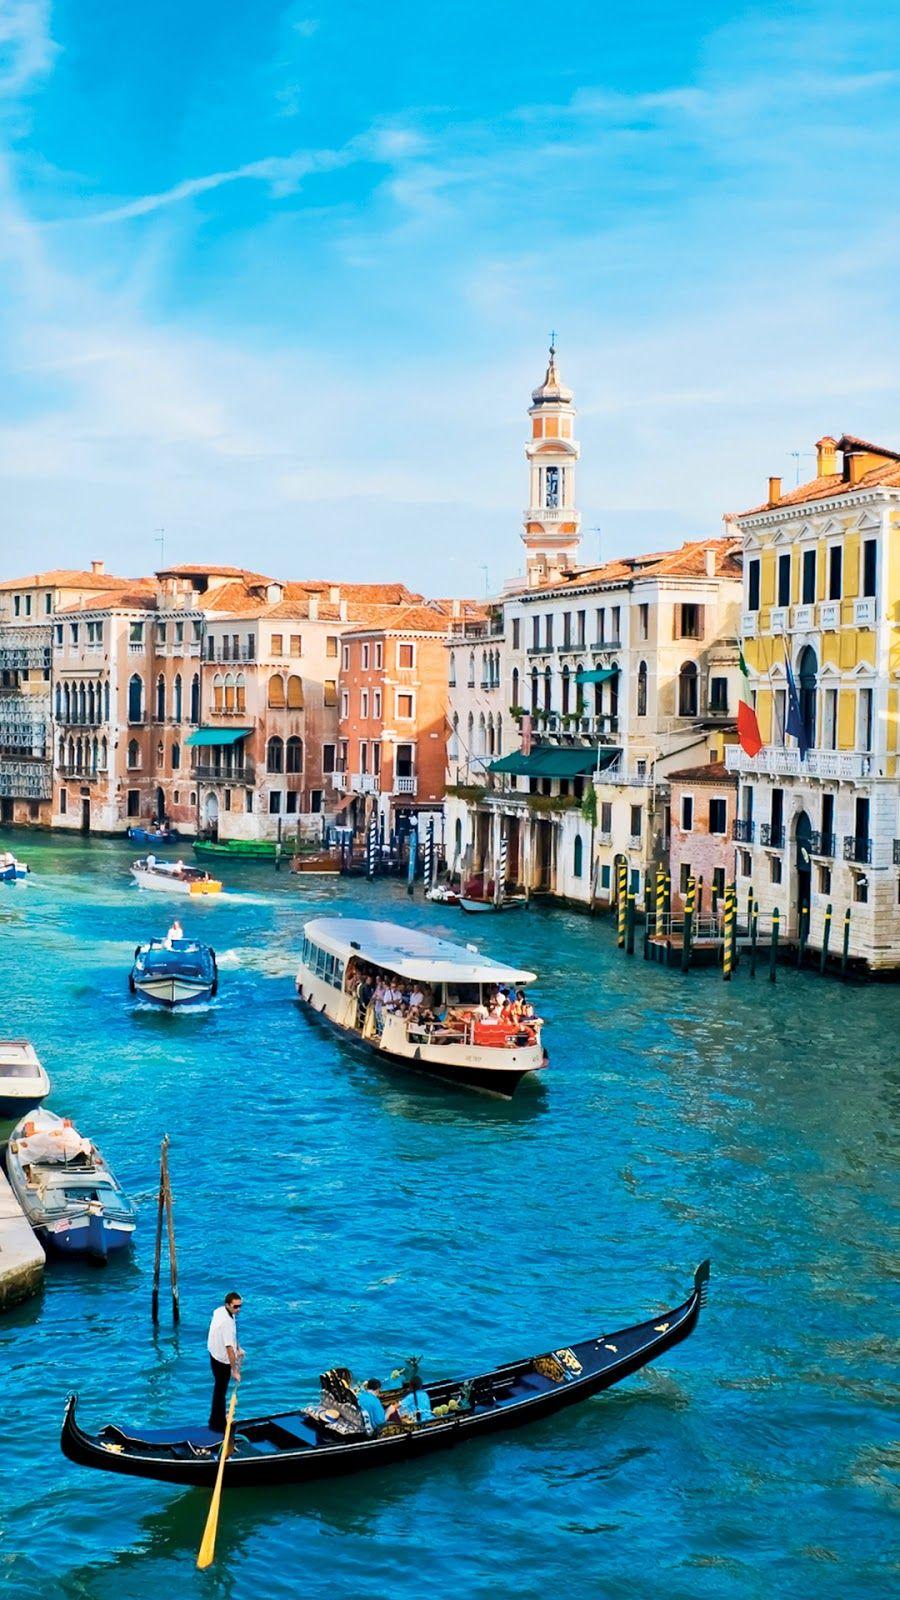 Download Venice Wallpaper for your Android, iPhone